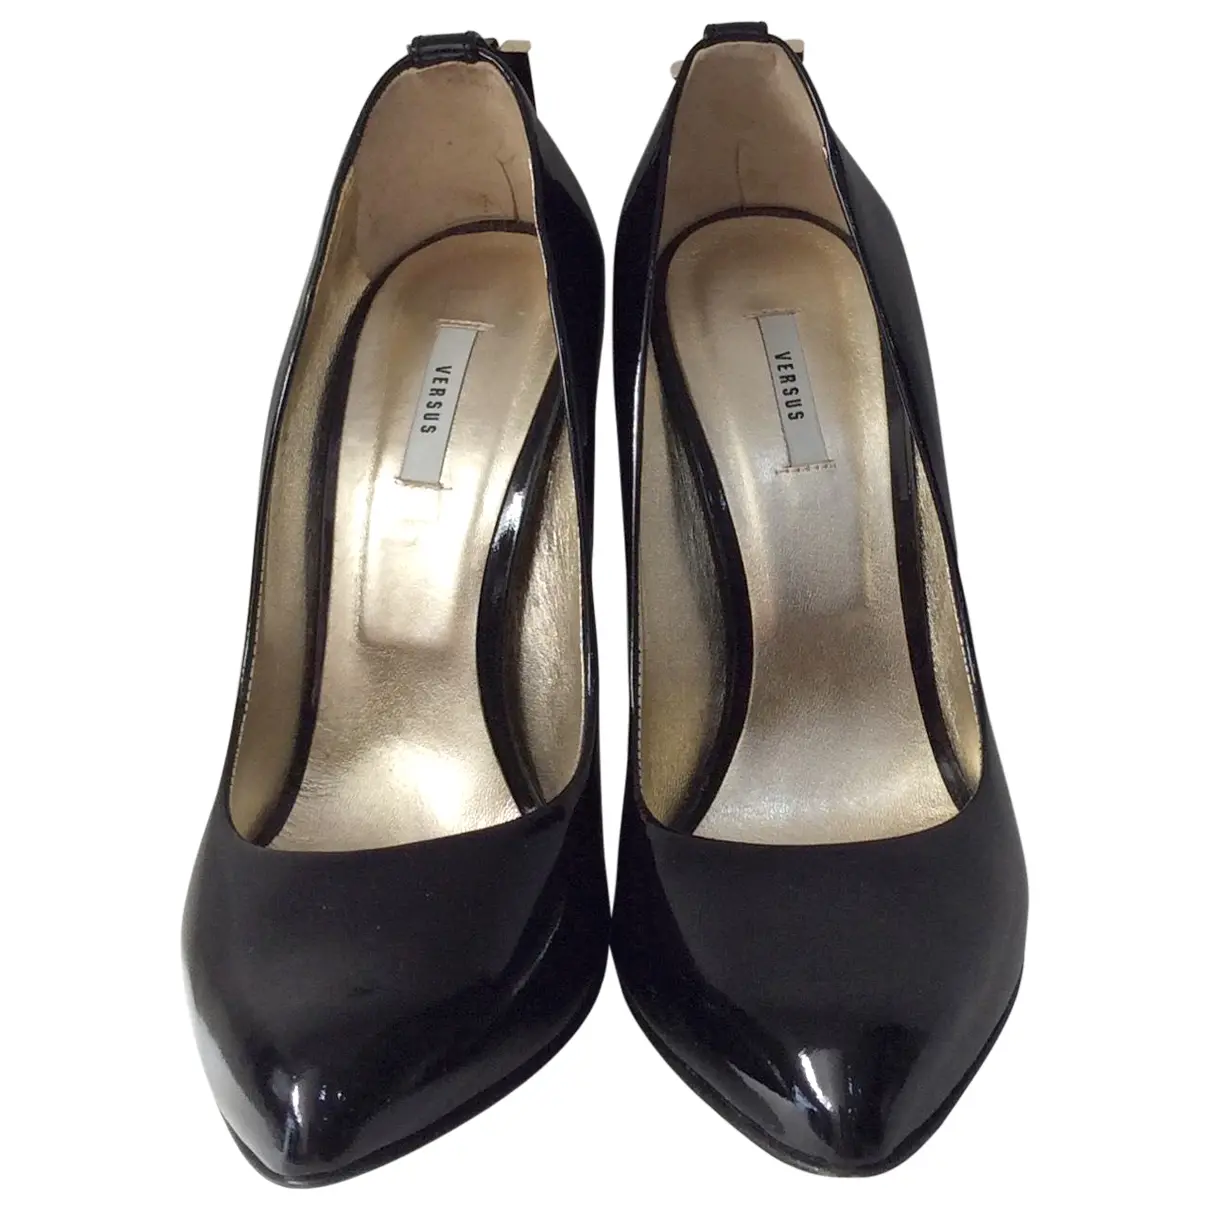 Versus Patent leather heels for sale